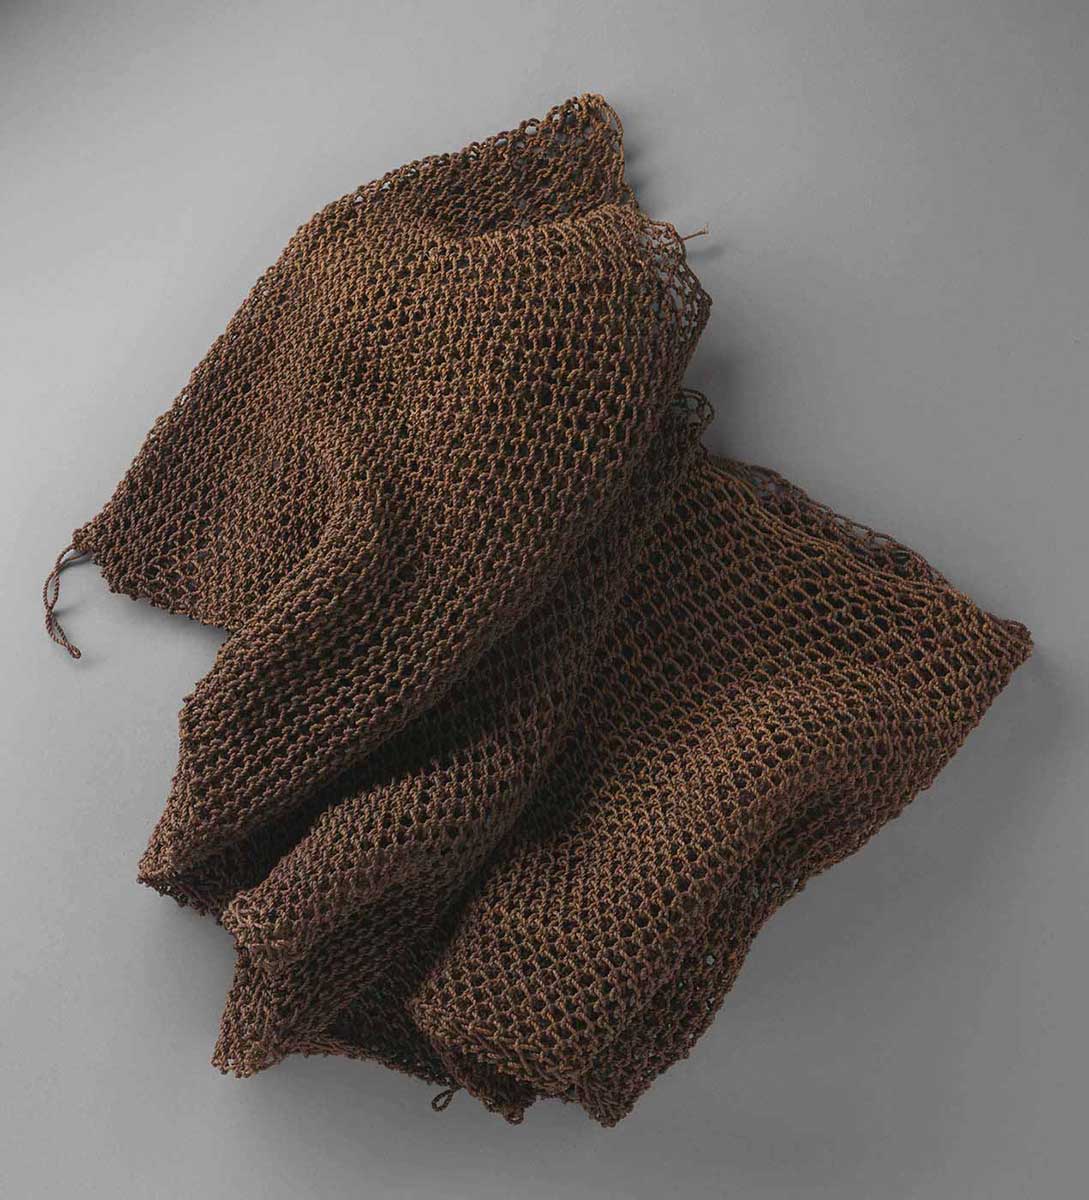 A fishing net, made from natural fibre string. The net is folded in upon itself, suggesting that it is larger than it looks. The string is light brown in colour; the precision of the weaving indicates that it was made by a skilled First Nations weaver. - click to view larger image